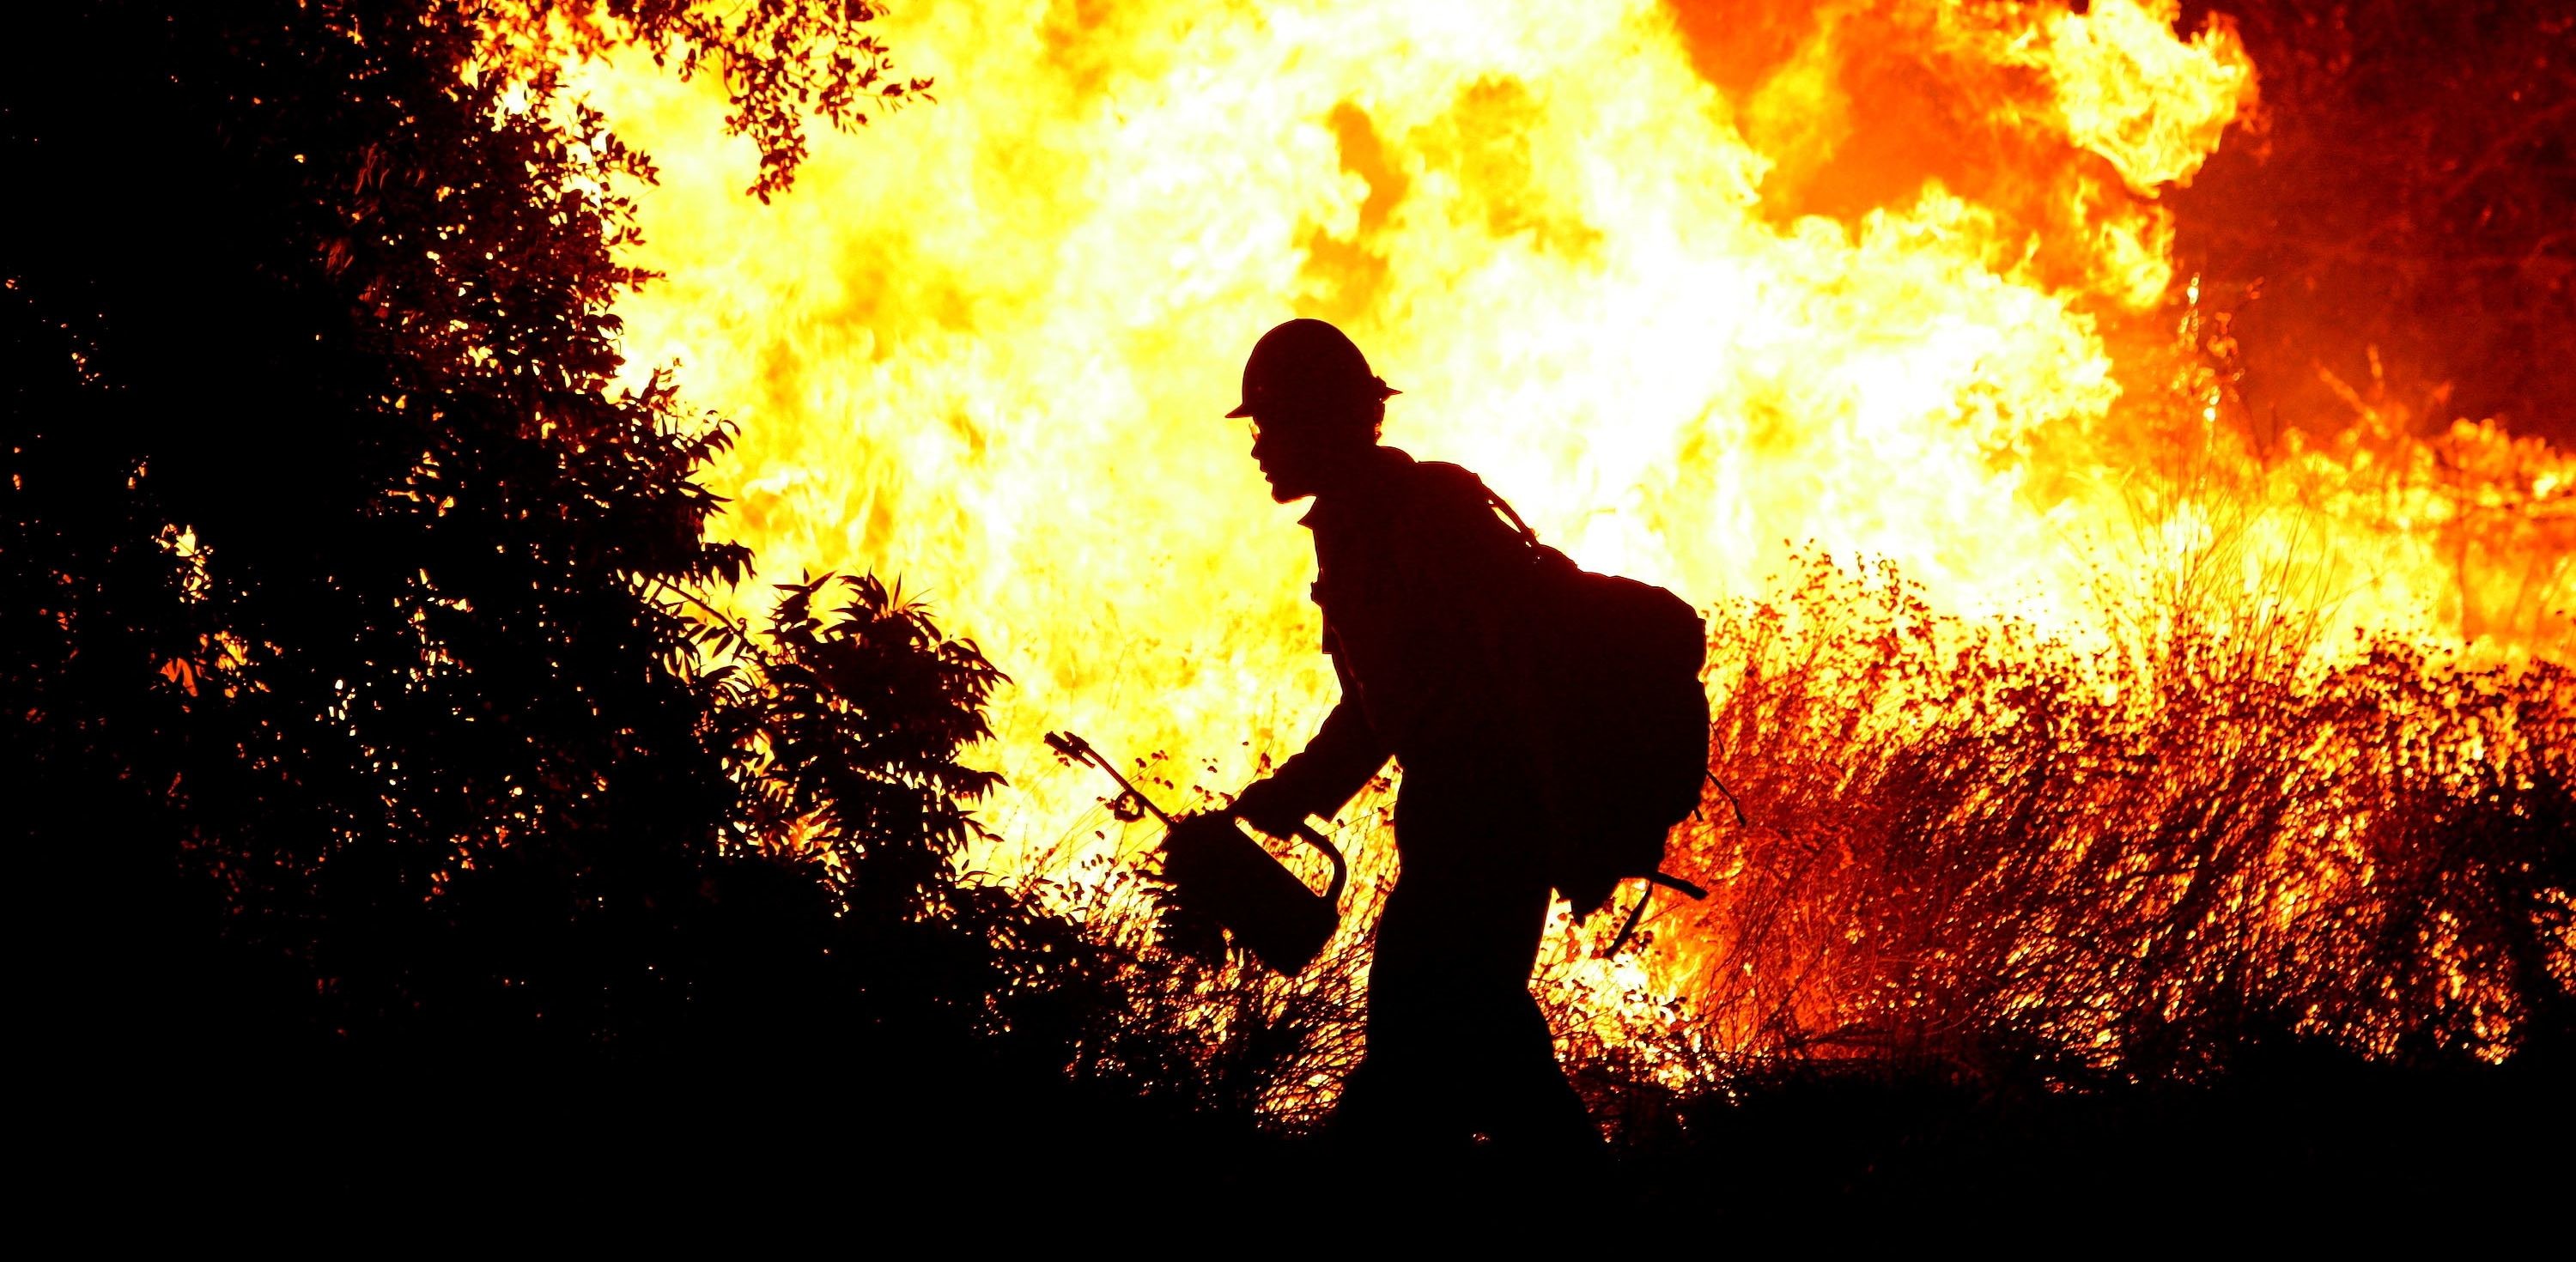 Firefighter background image Stock Photos Royalty Free Firefighter  background image Images  Depositphotos